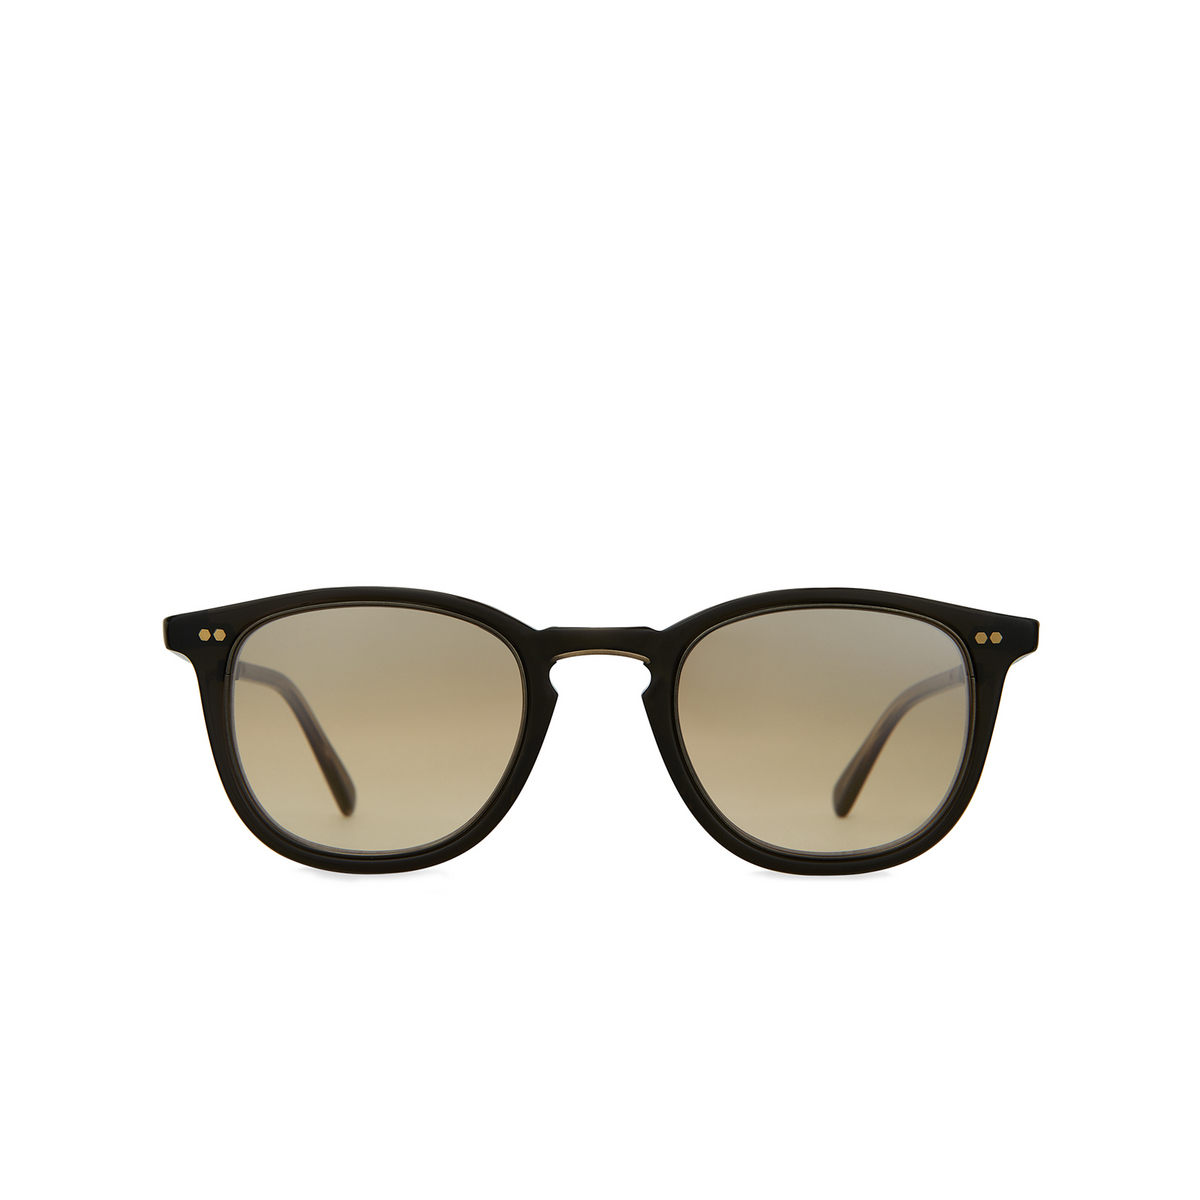 Mr. Leight® Square Sunglasses: Coopers S color Black Tar - Antique Gold / Smokey Bktr-atg/smky - front view.